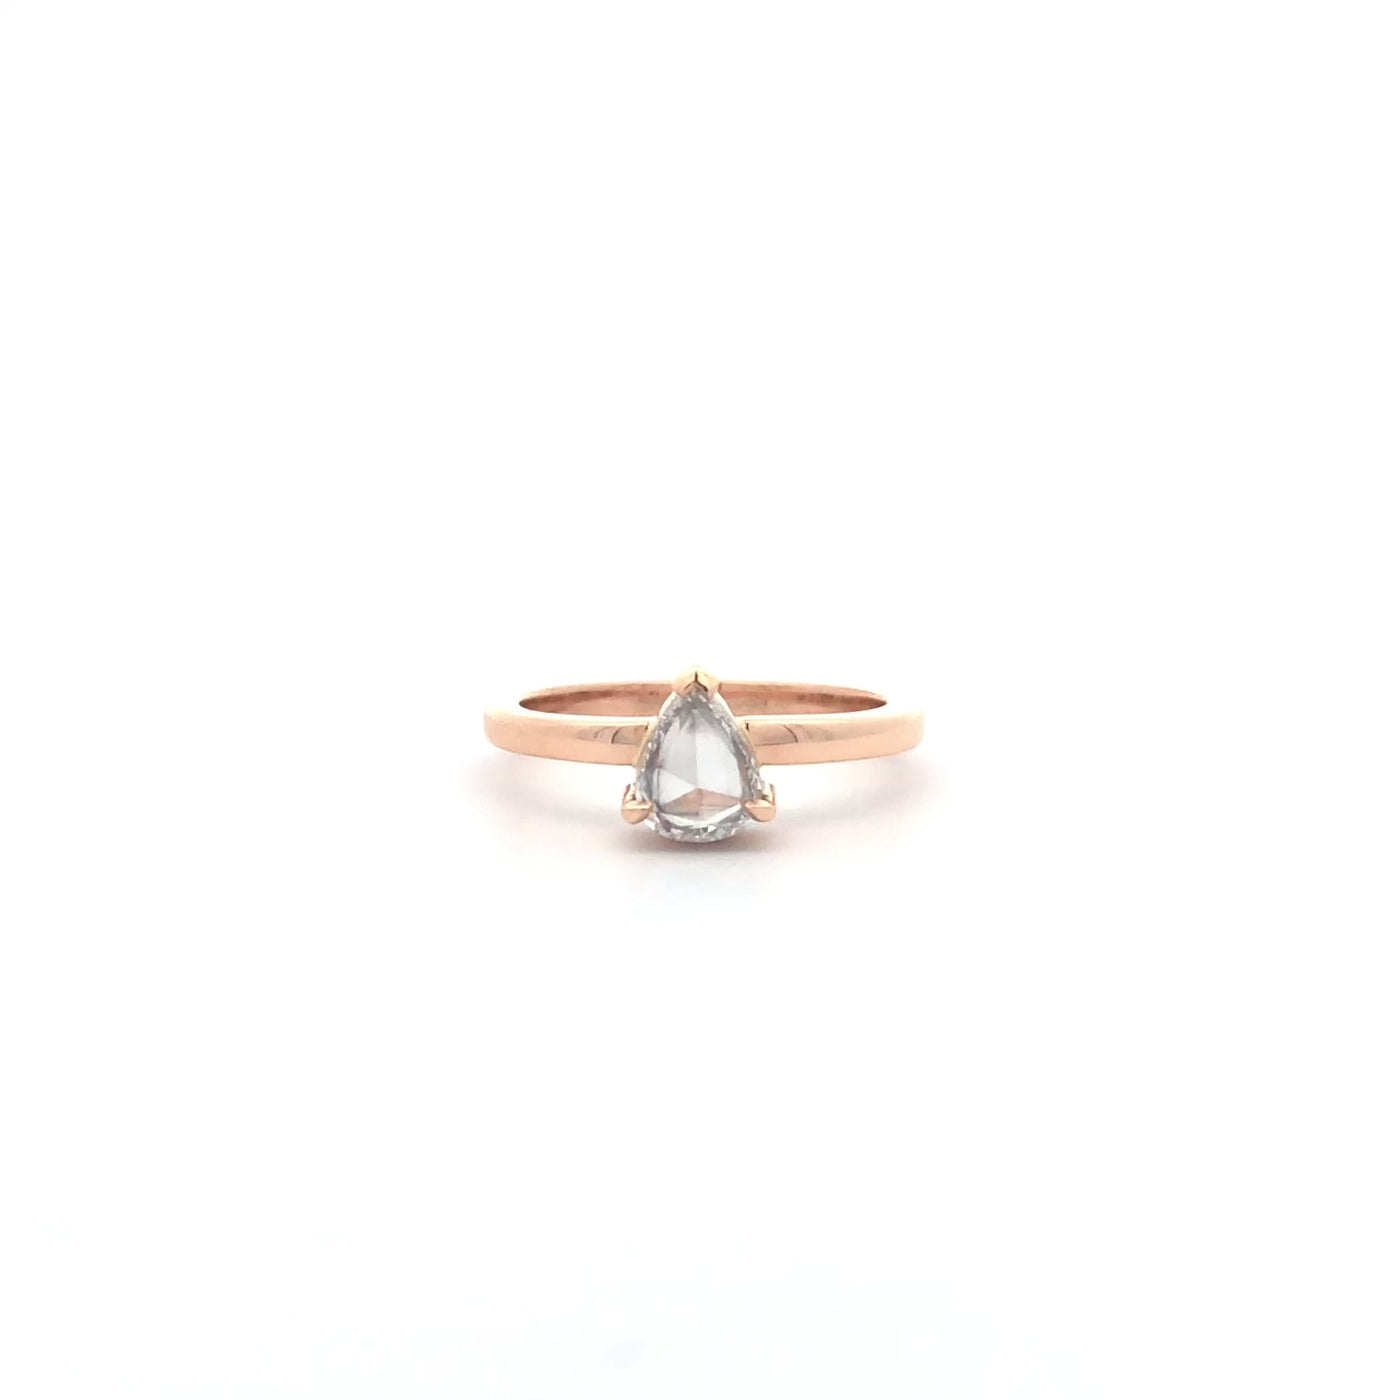 Crest: Rose Cut Diamond Solitaire Ring in Rose Gold